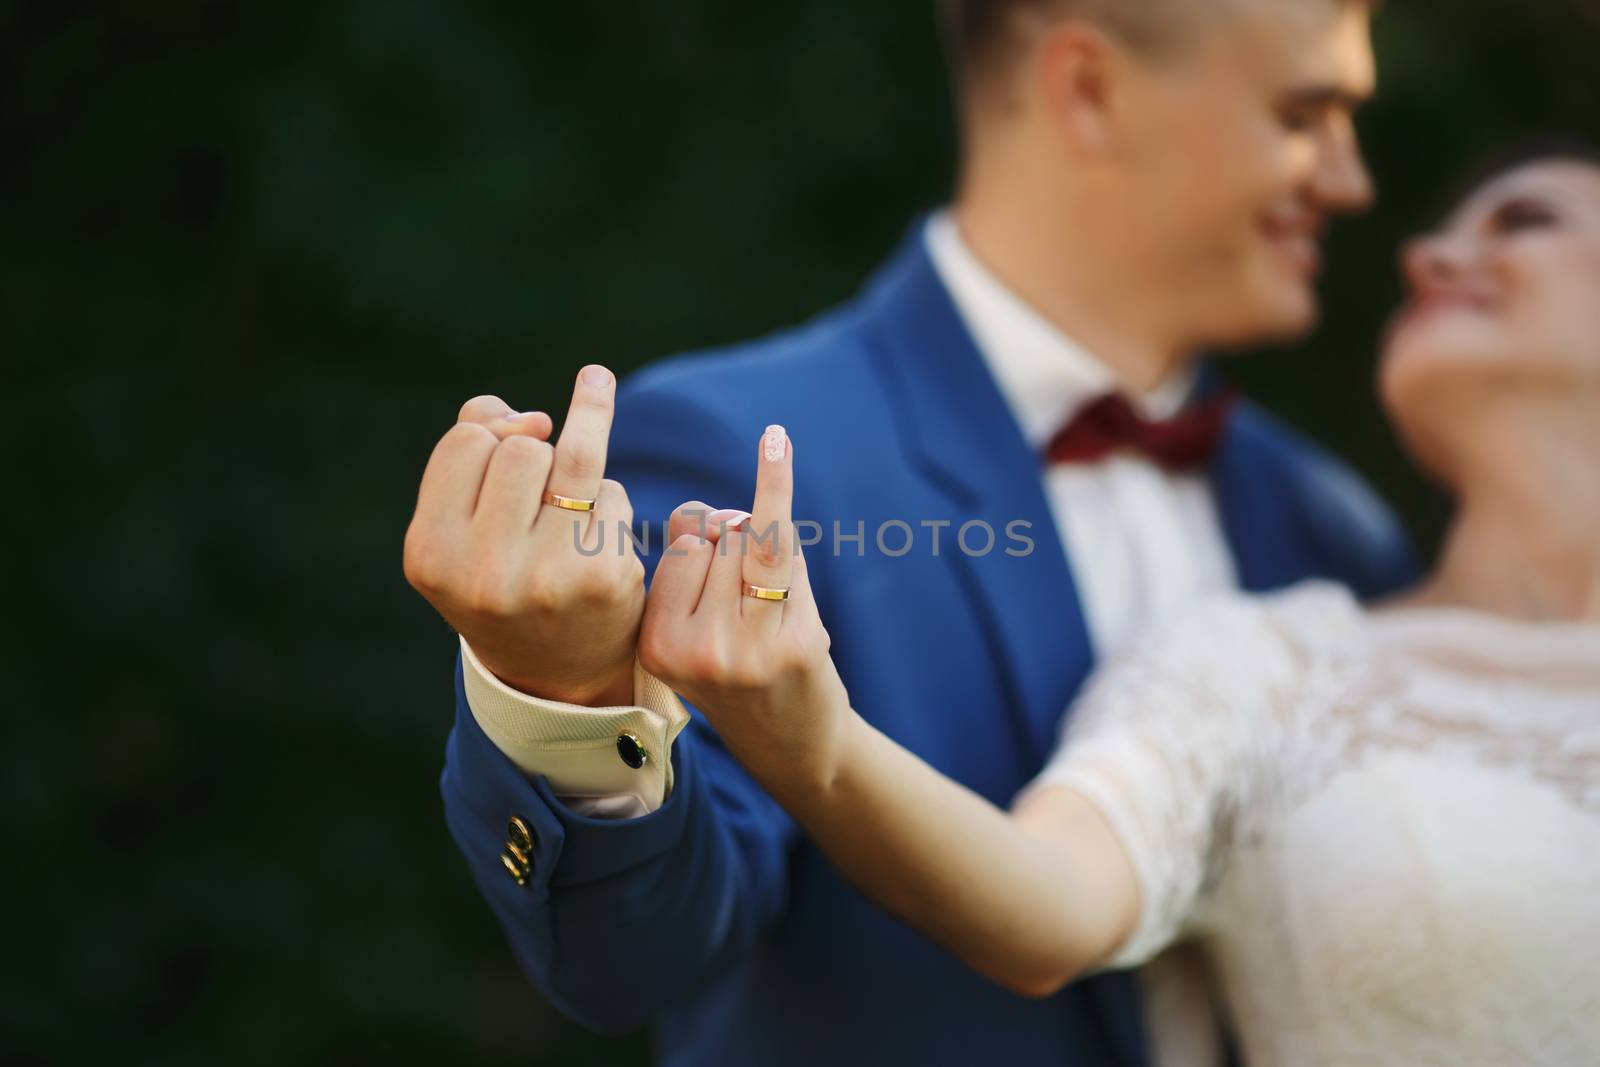 Hands of bride and groom in wedding rings. Couple playfully show their rings